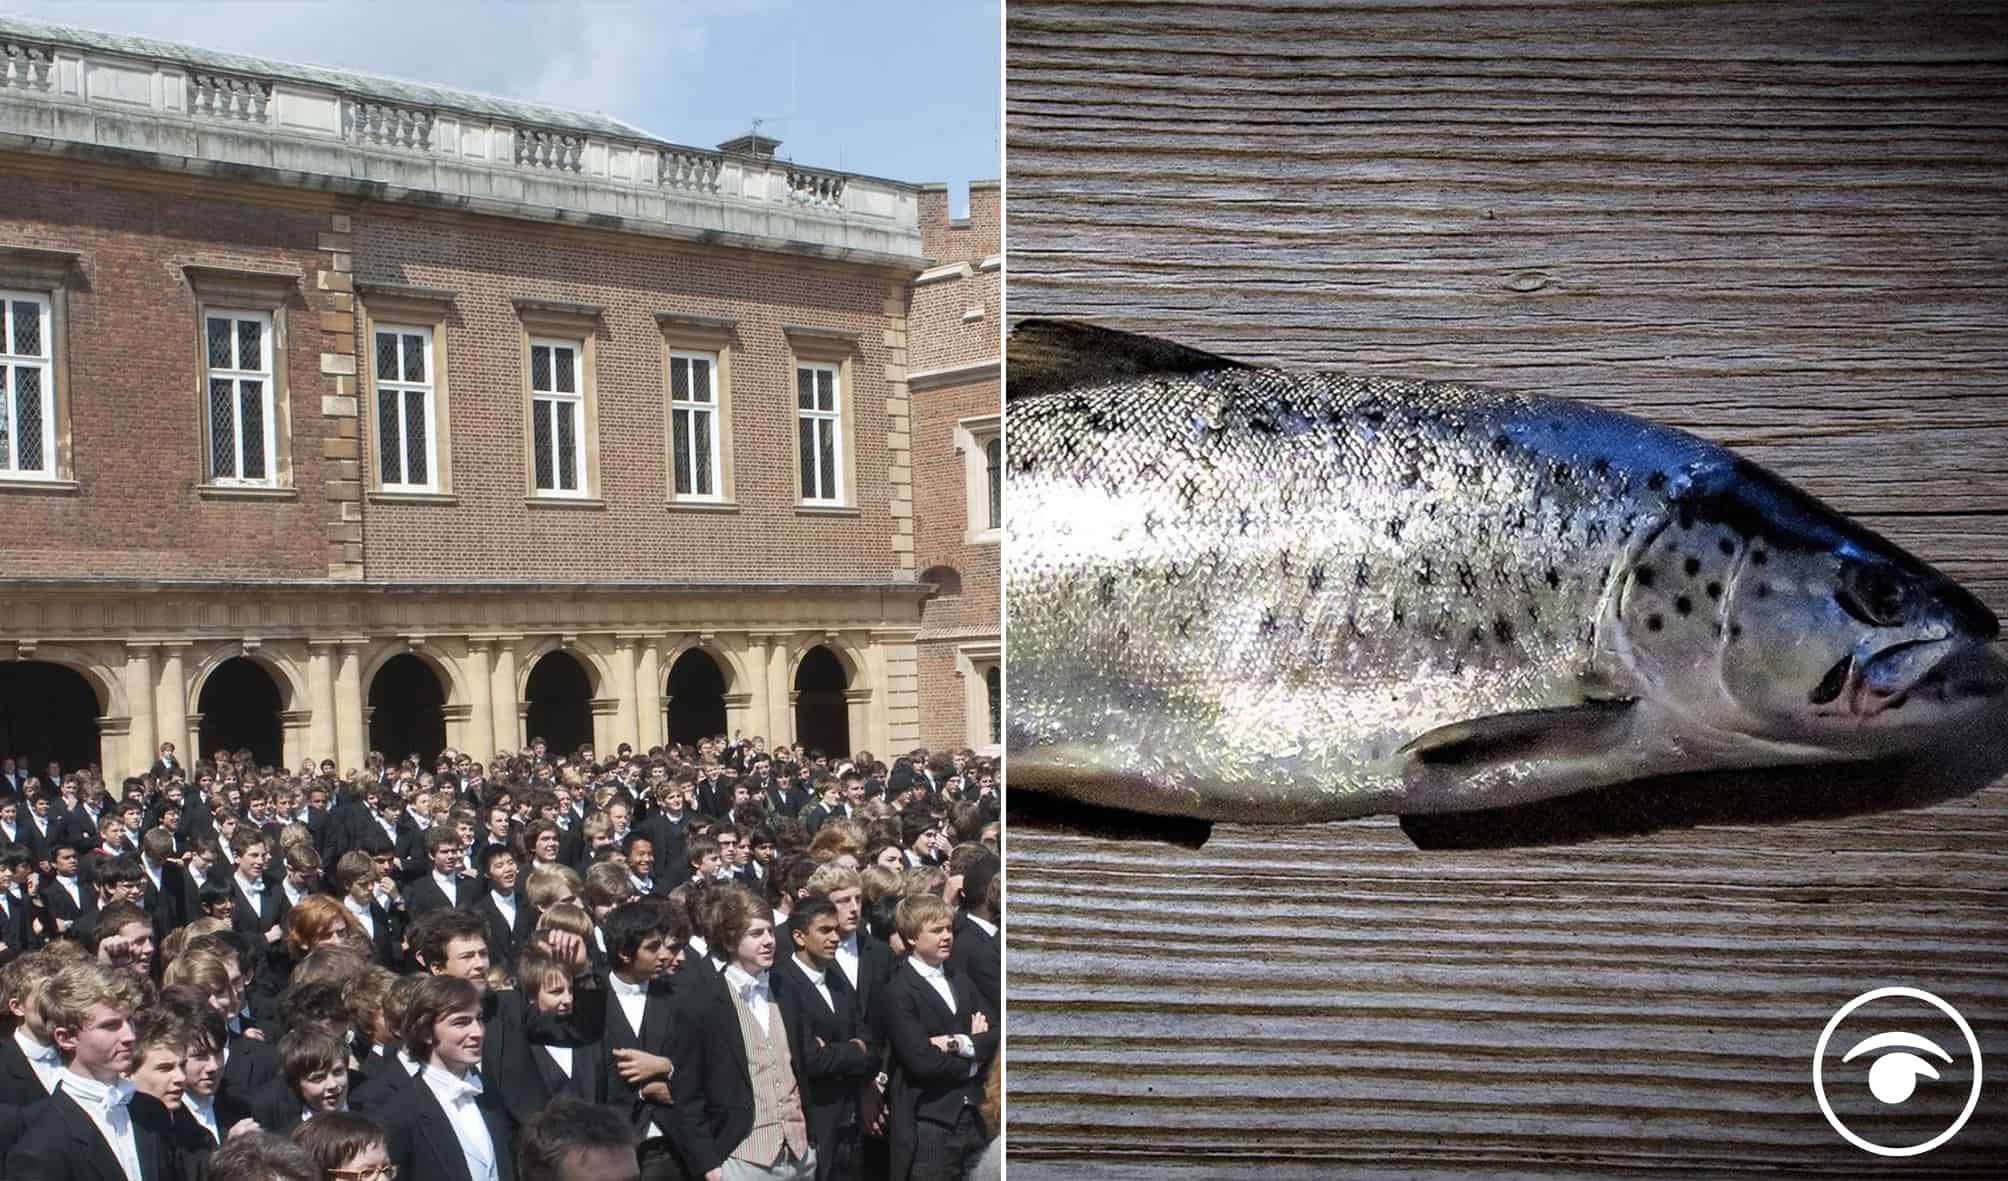 Eton College plans for 3,000 home town could destroy one of Britain’s most important trout populations